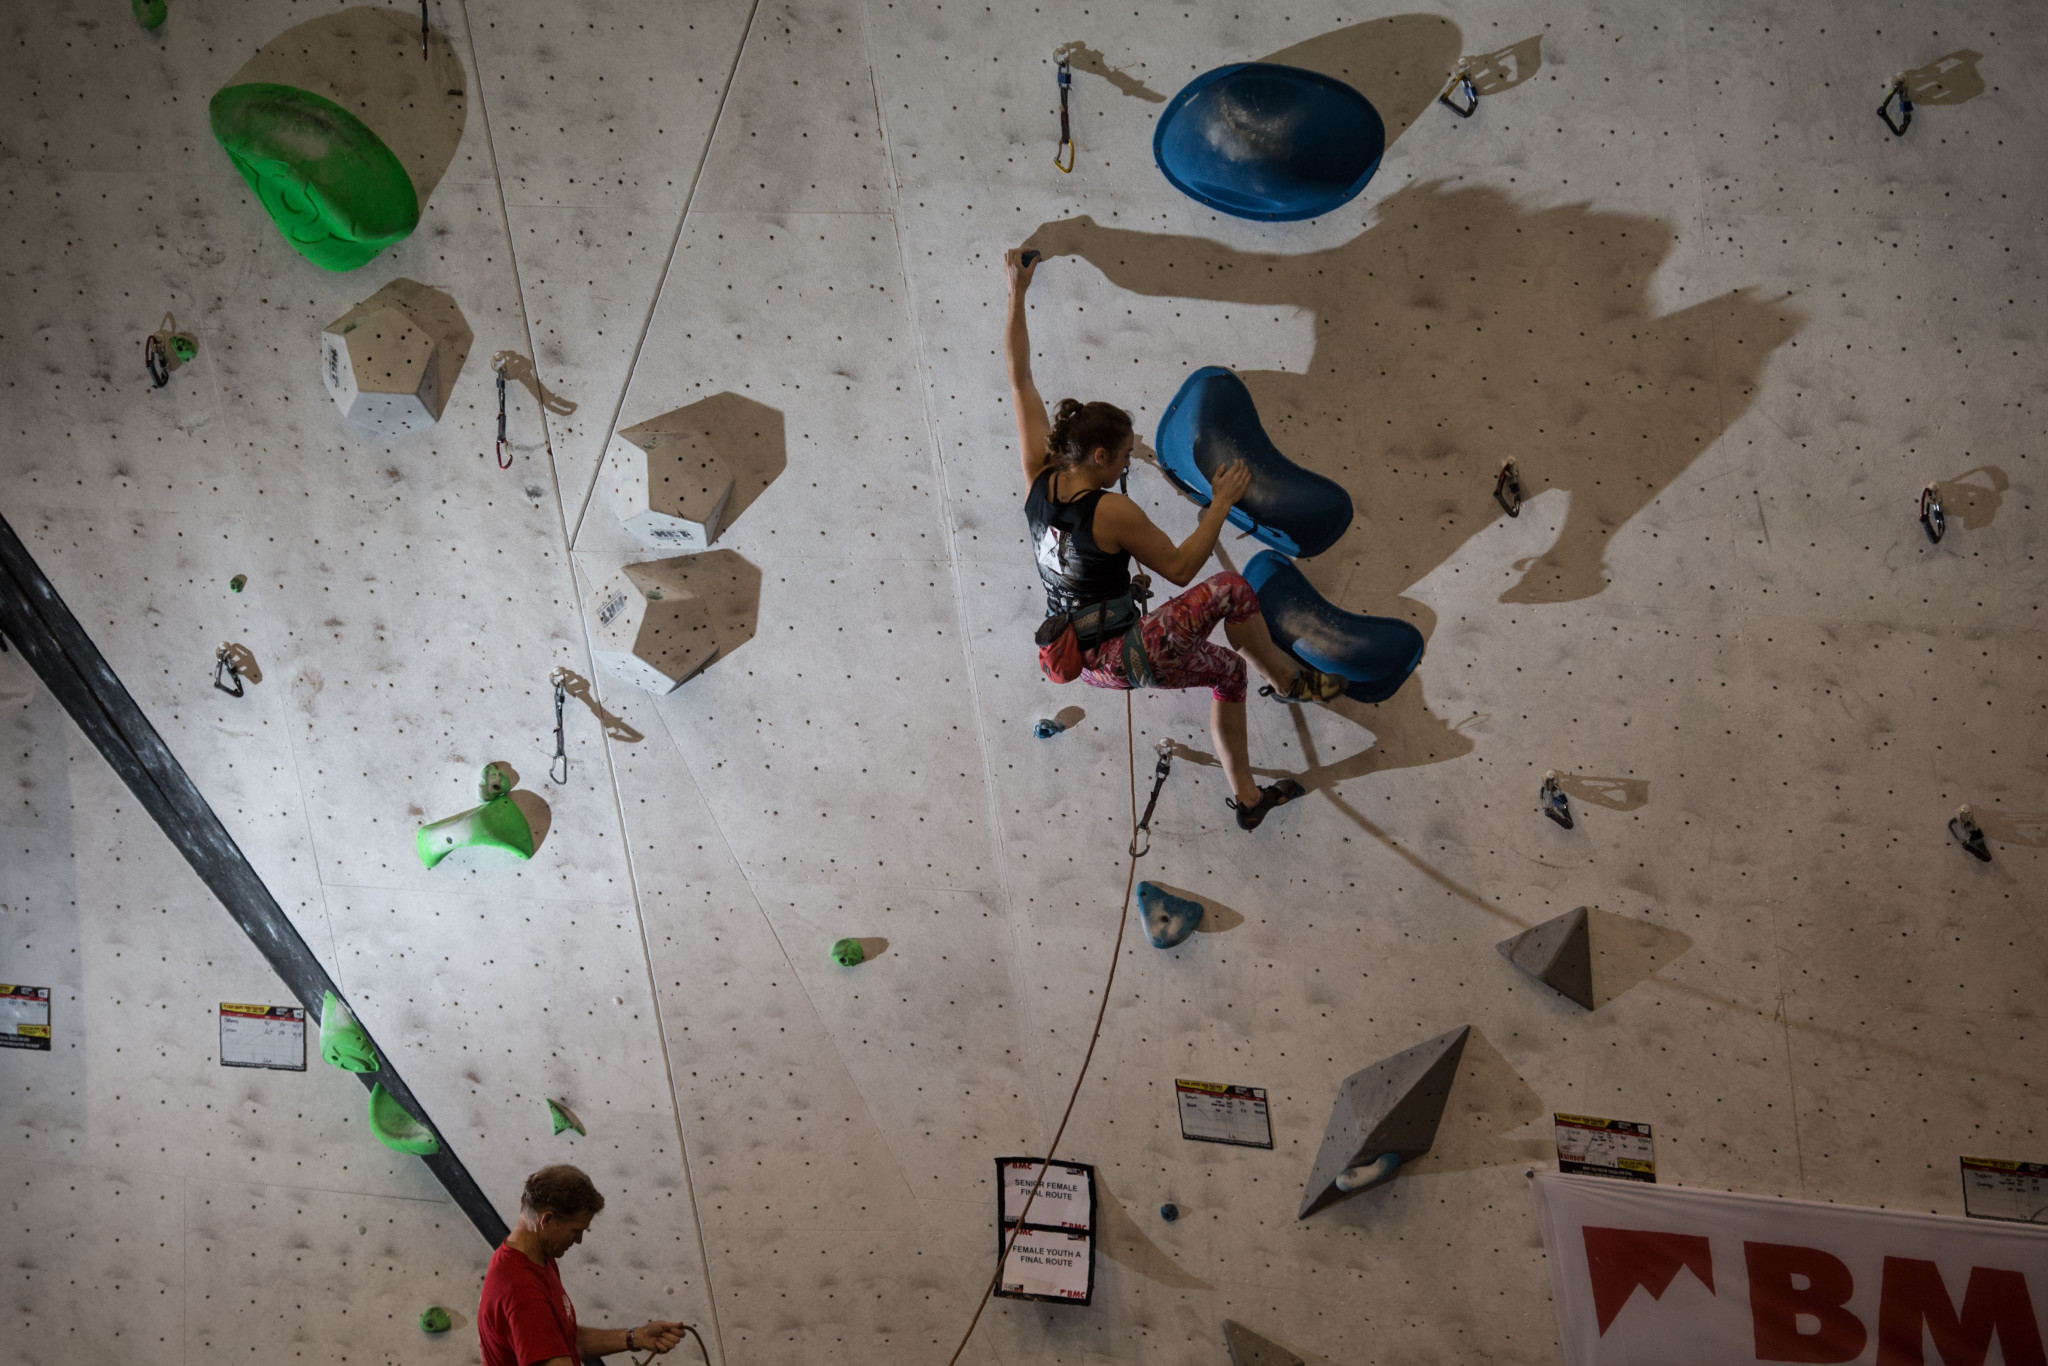 Sport climbing will make its Olympic debut at Tokyo 2020 ©Getty Images